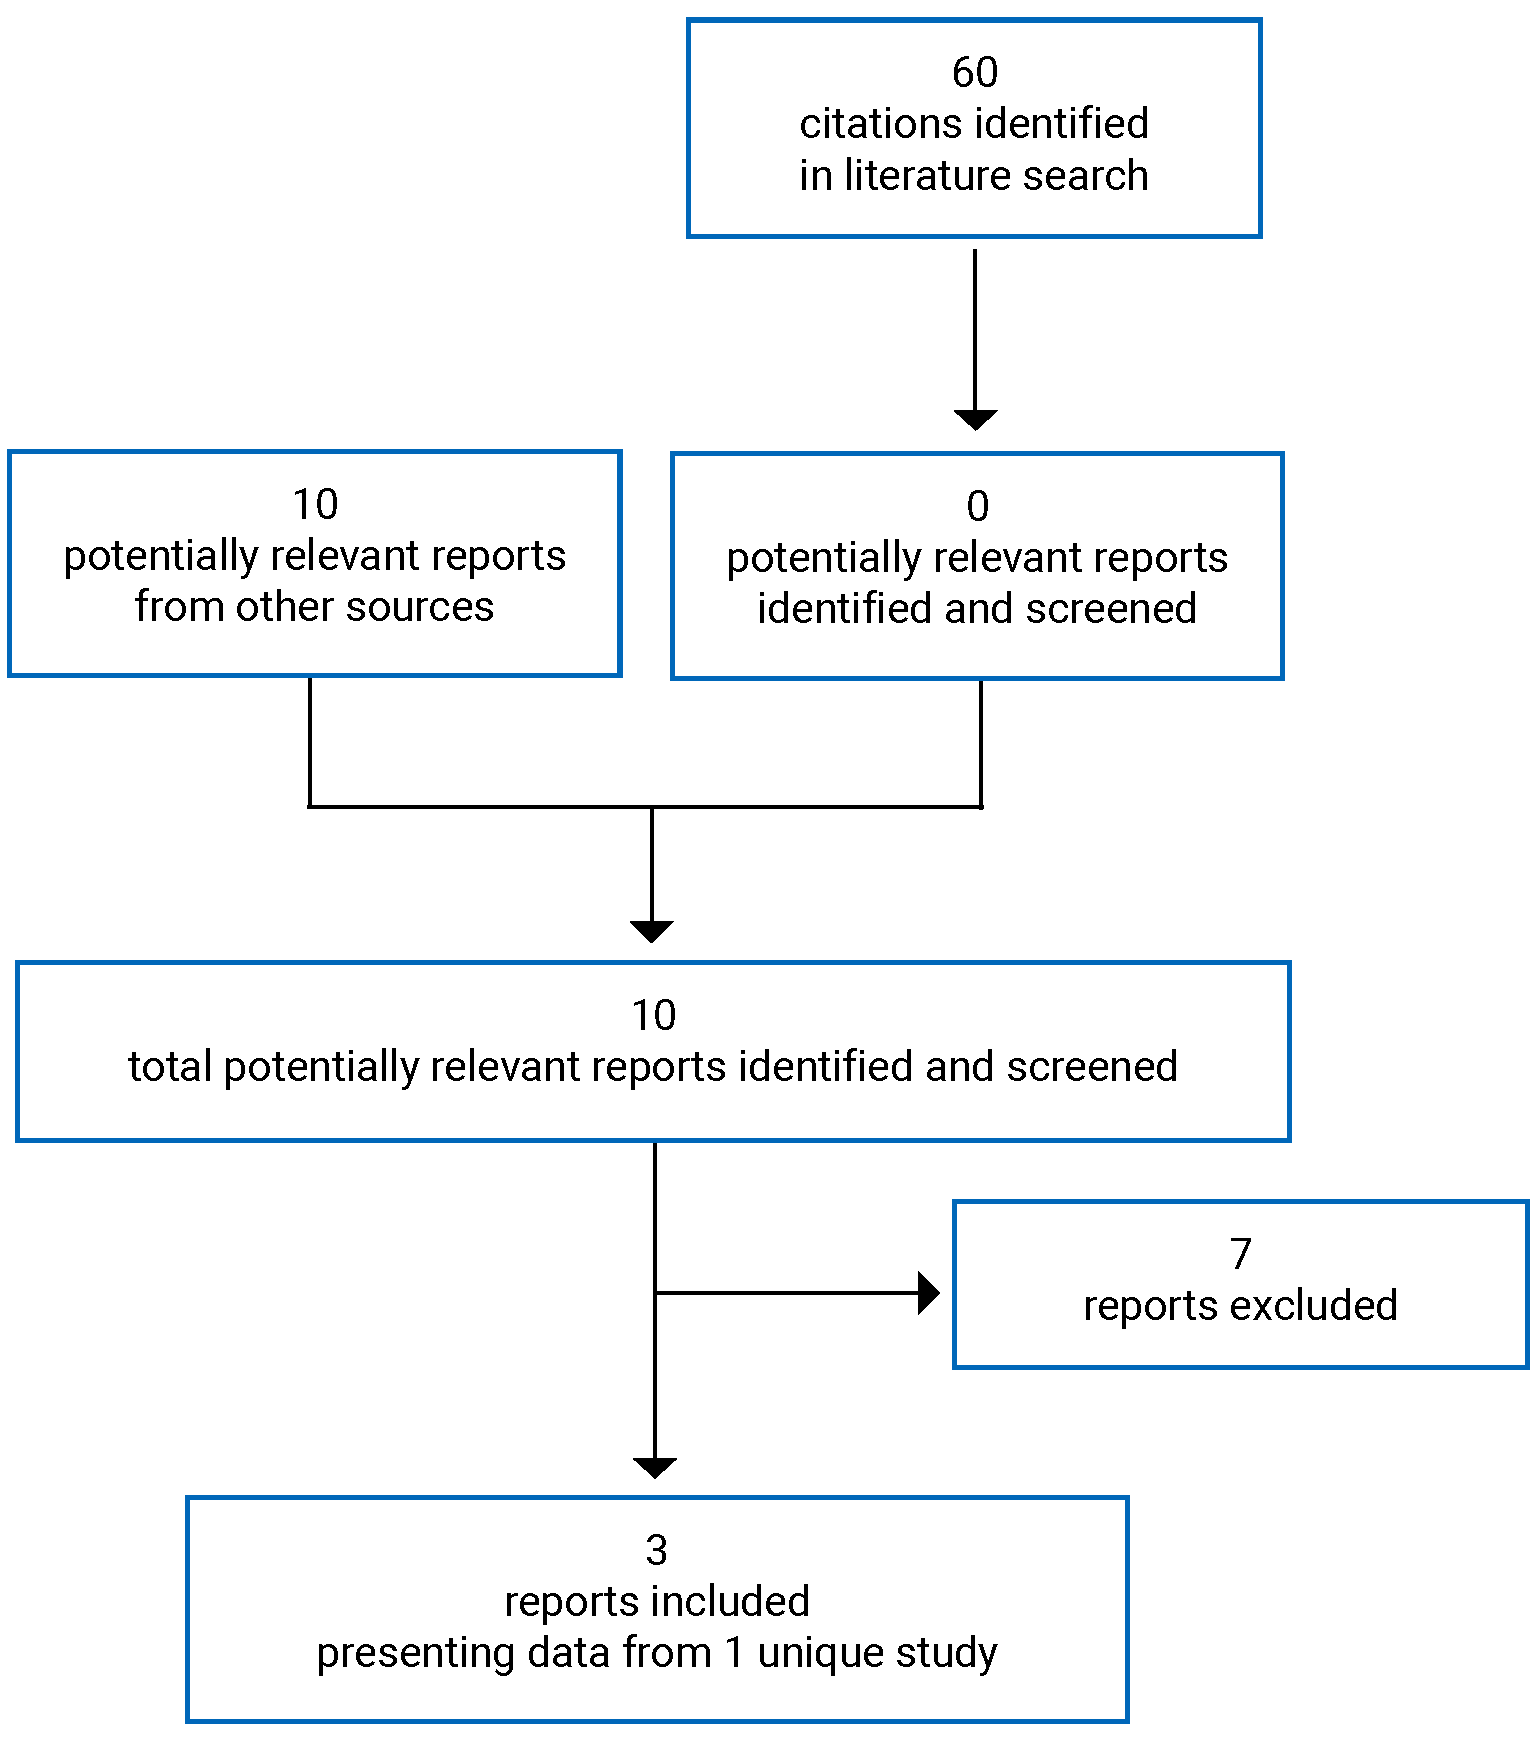 60 citations were identified, all of which were excluded, while 10 potentially relevant reports were retrieved from the sponsors’ submission. In total, 3 reports were included in the review from 1 study.